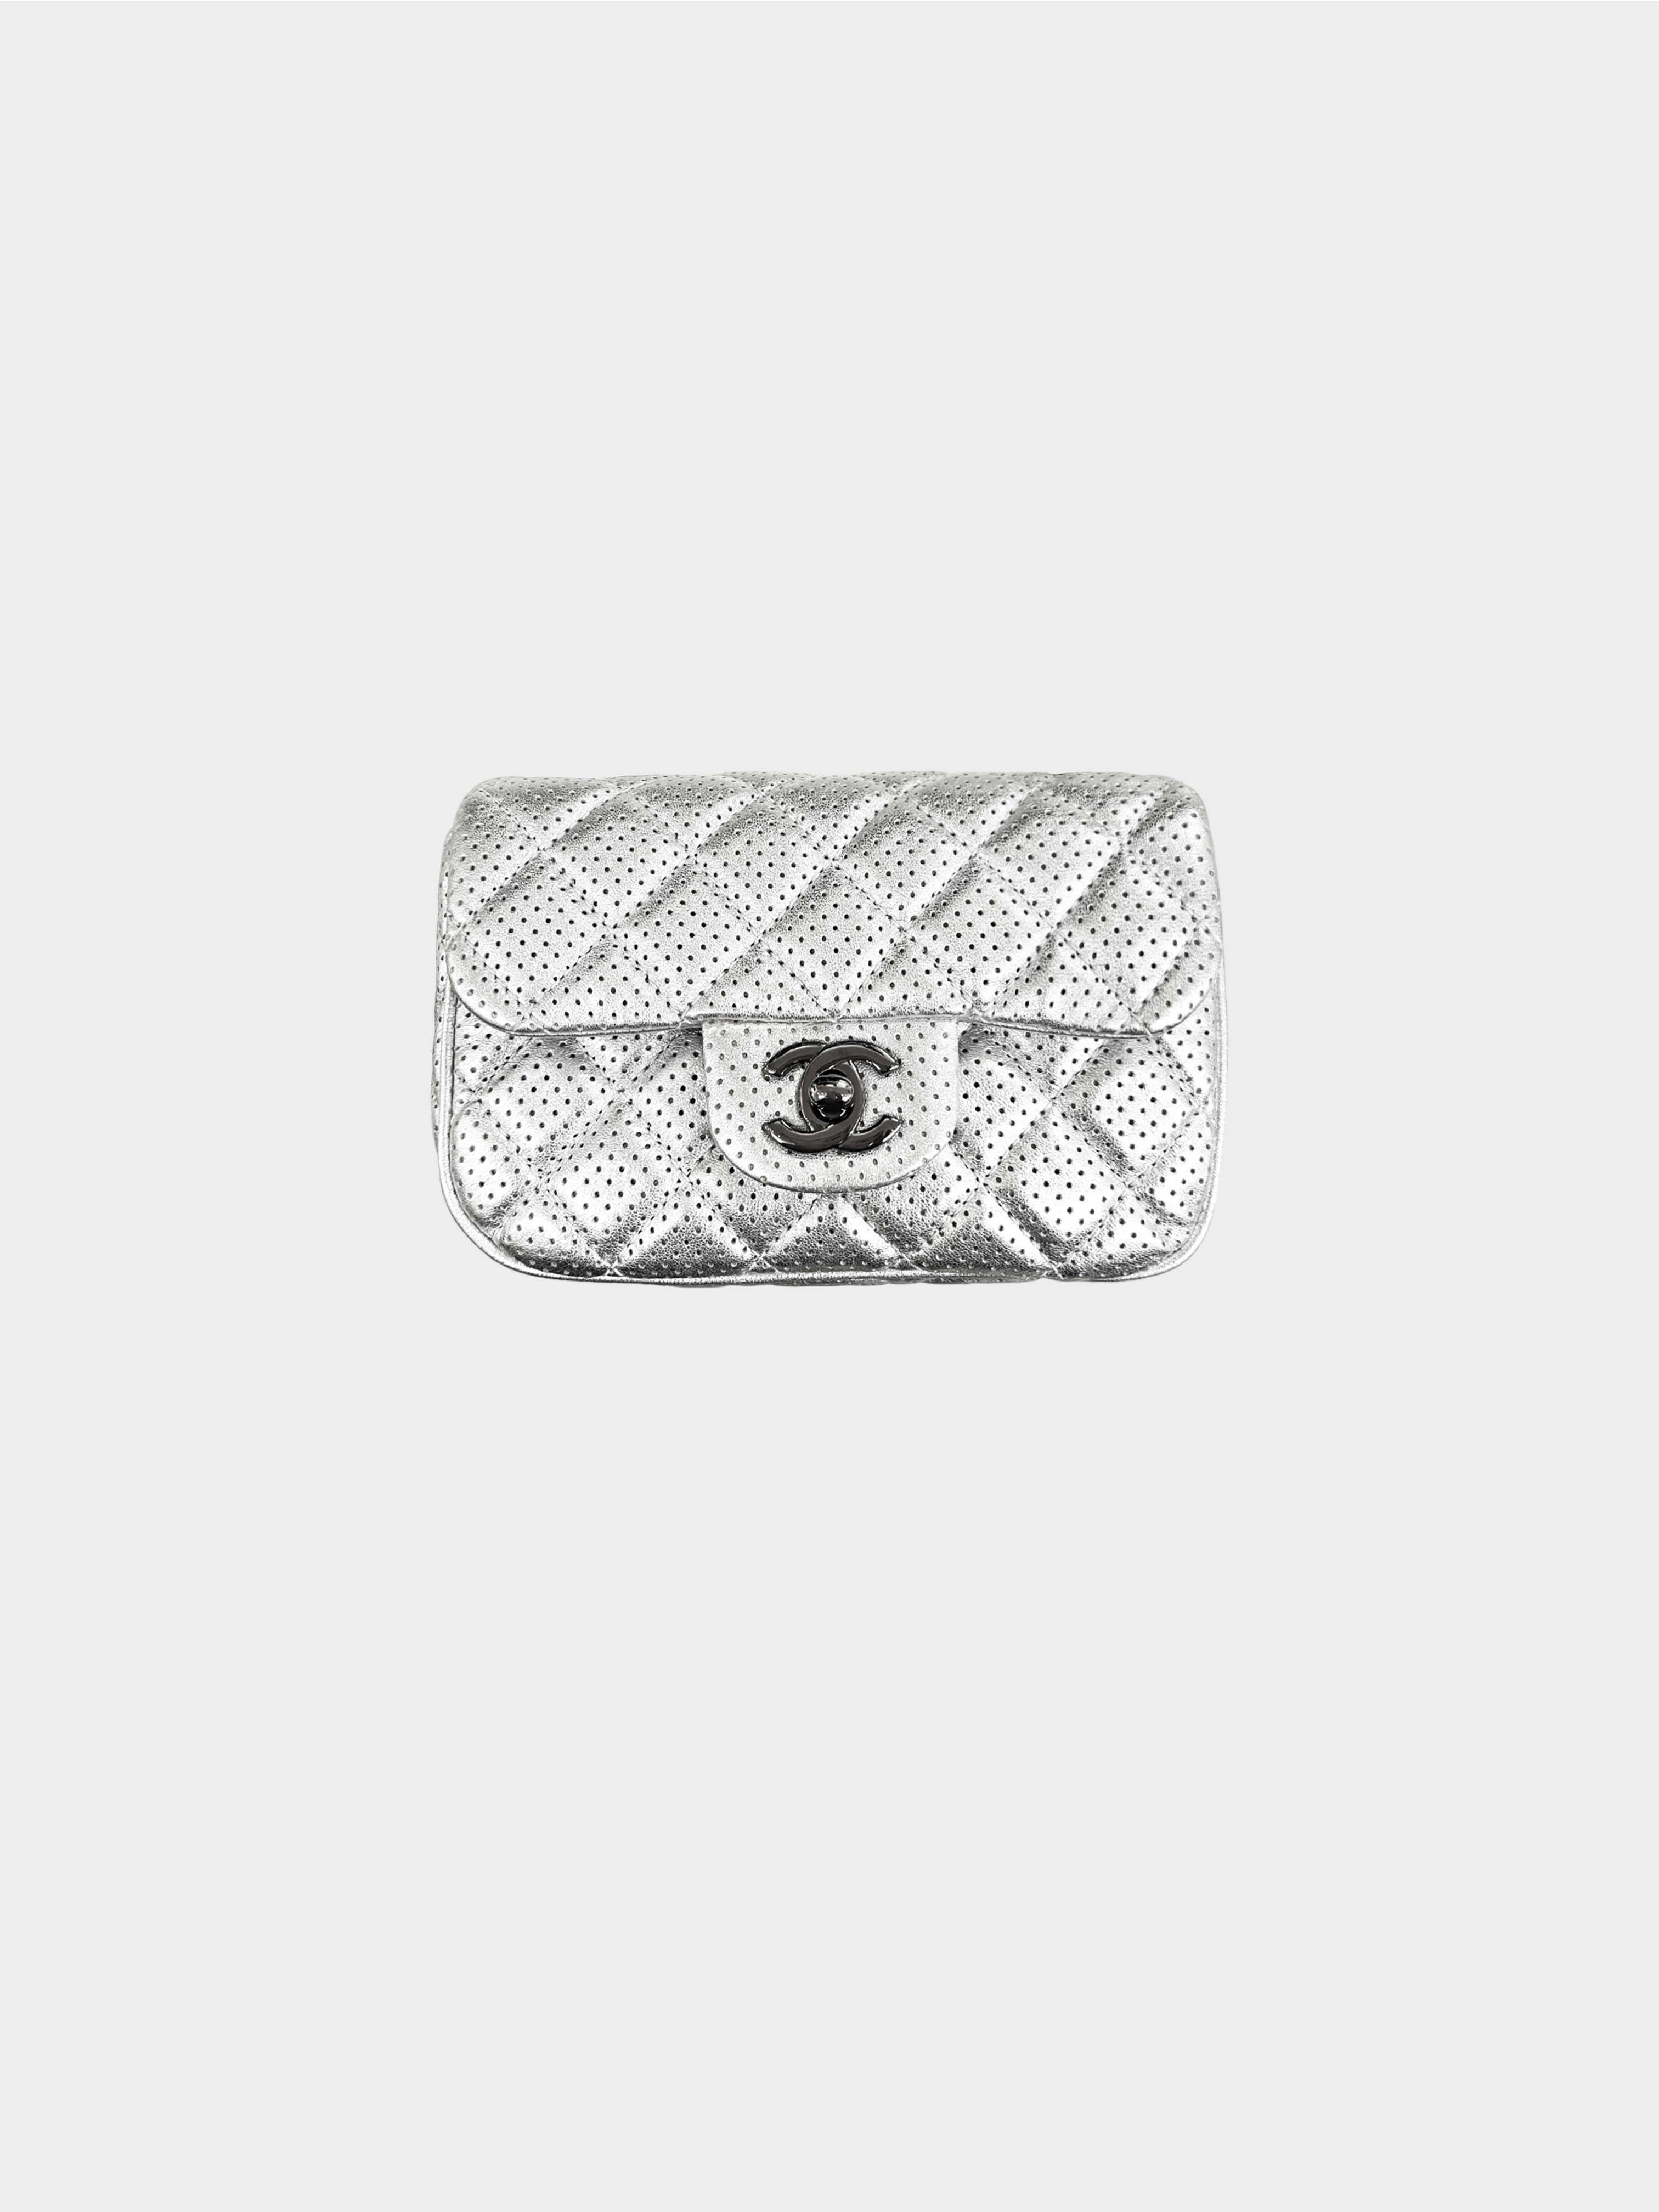 Chanel 2014 Silver Perforated Lambskin Leather Flap Bag